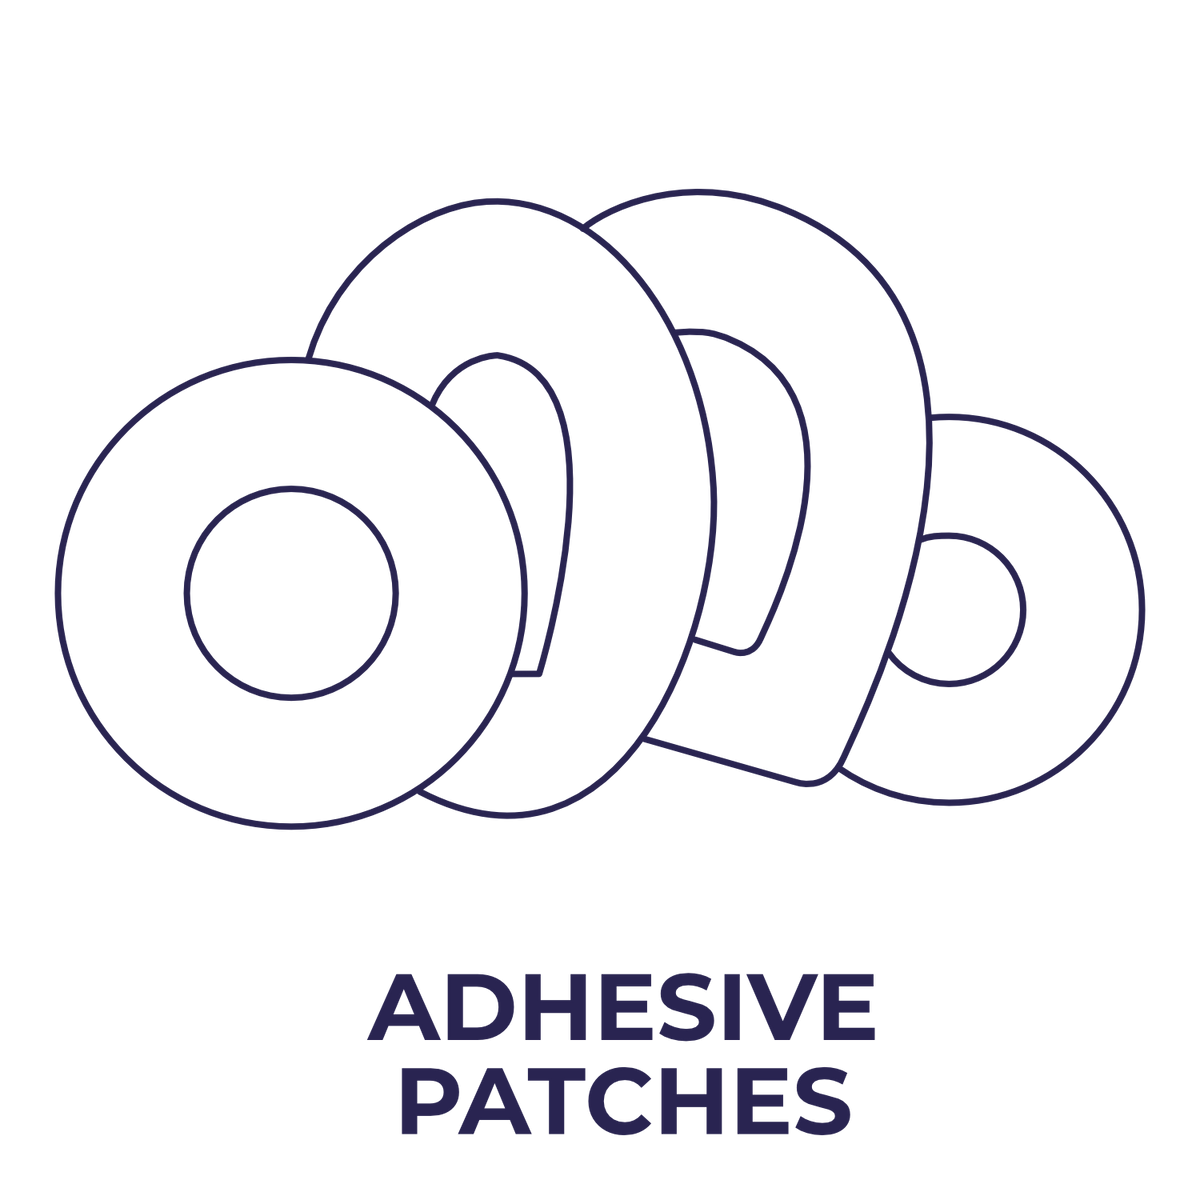 AdhesivePatches.png__PID:72f8d1d2-50d0-444a-a0eb-213581c56911